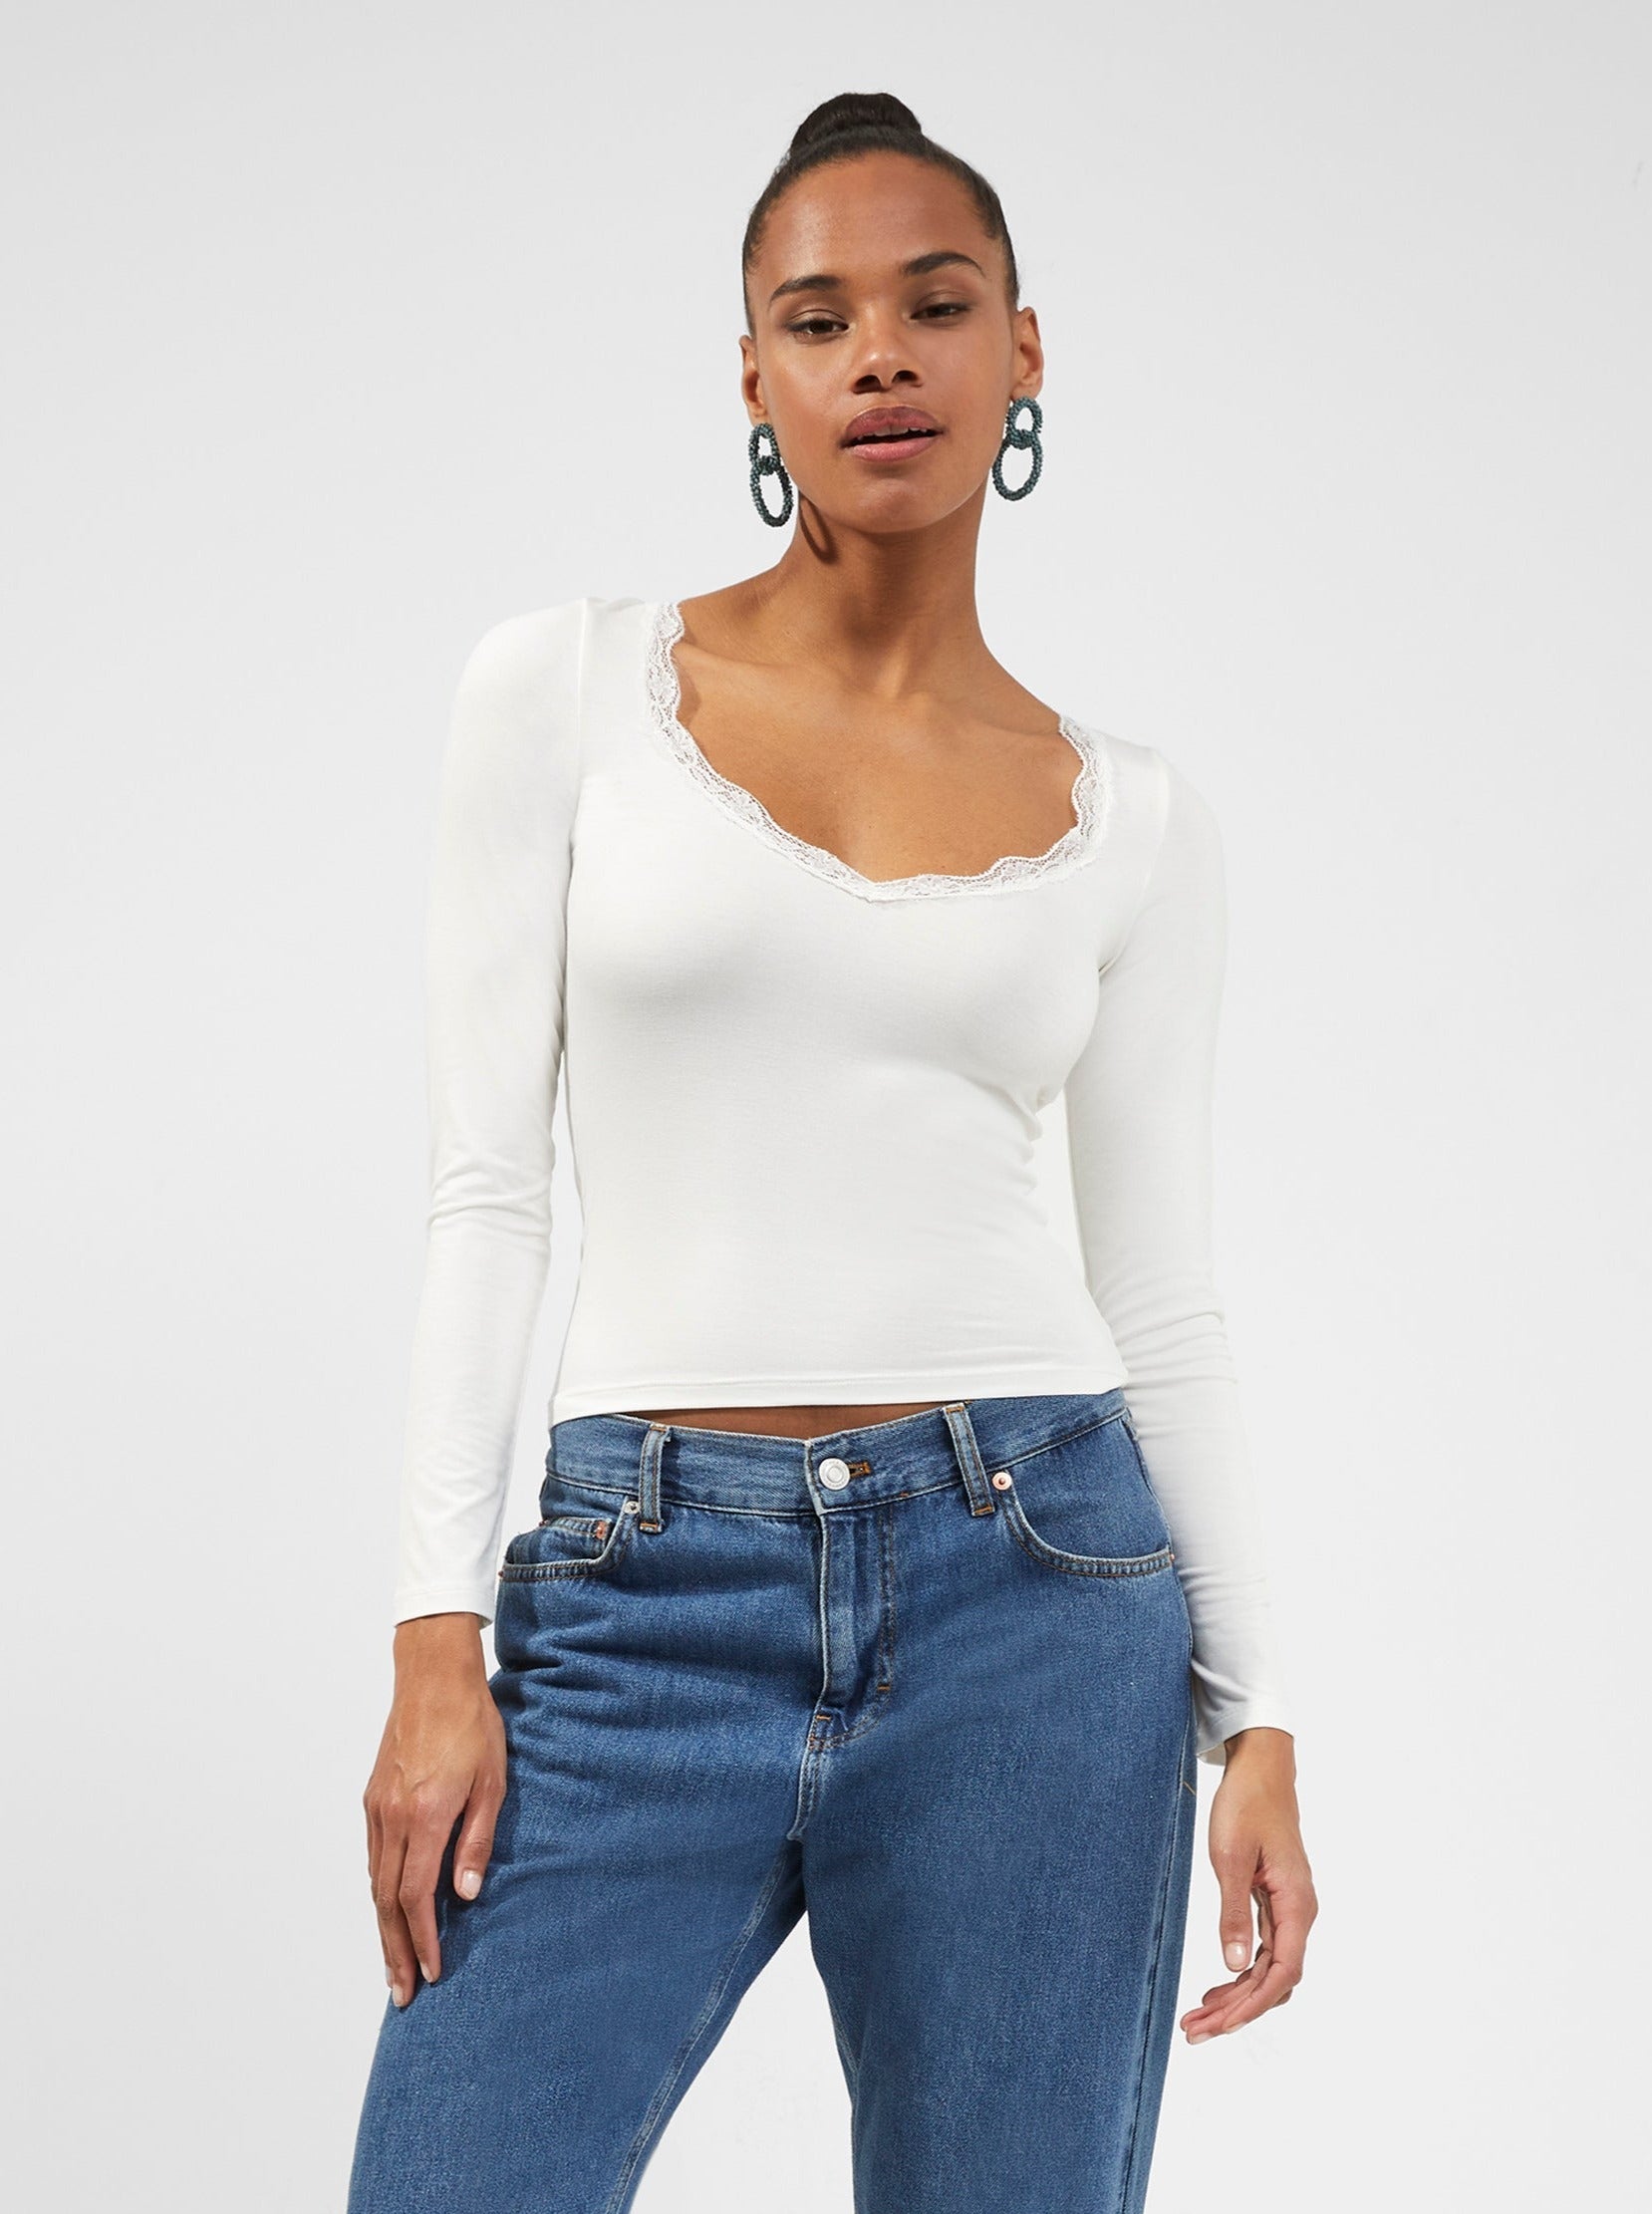 French Connection - Valentina Jersey Top | French Connection |  Shirts & Tops | Small - White - Size: S